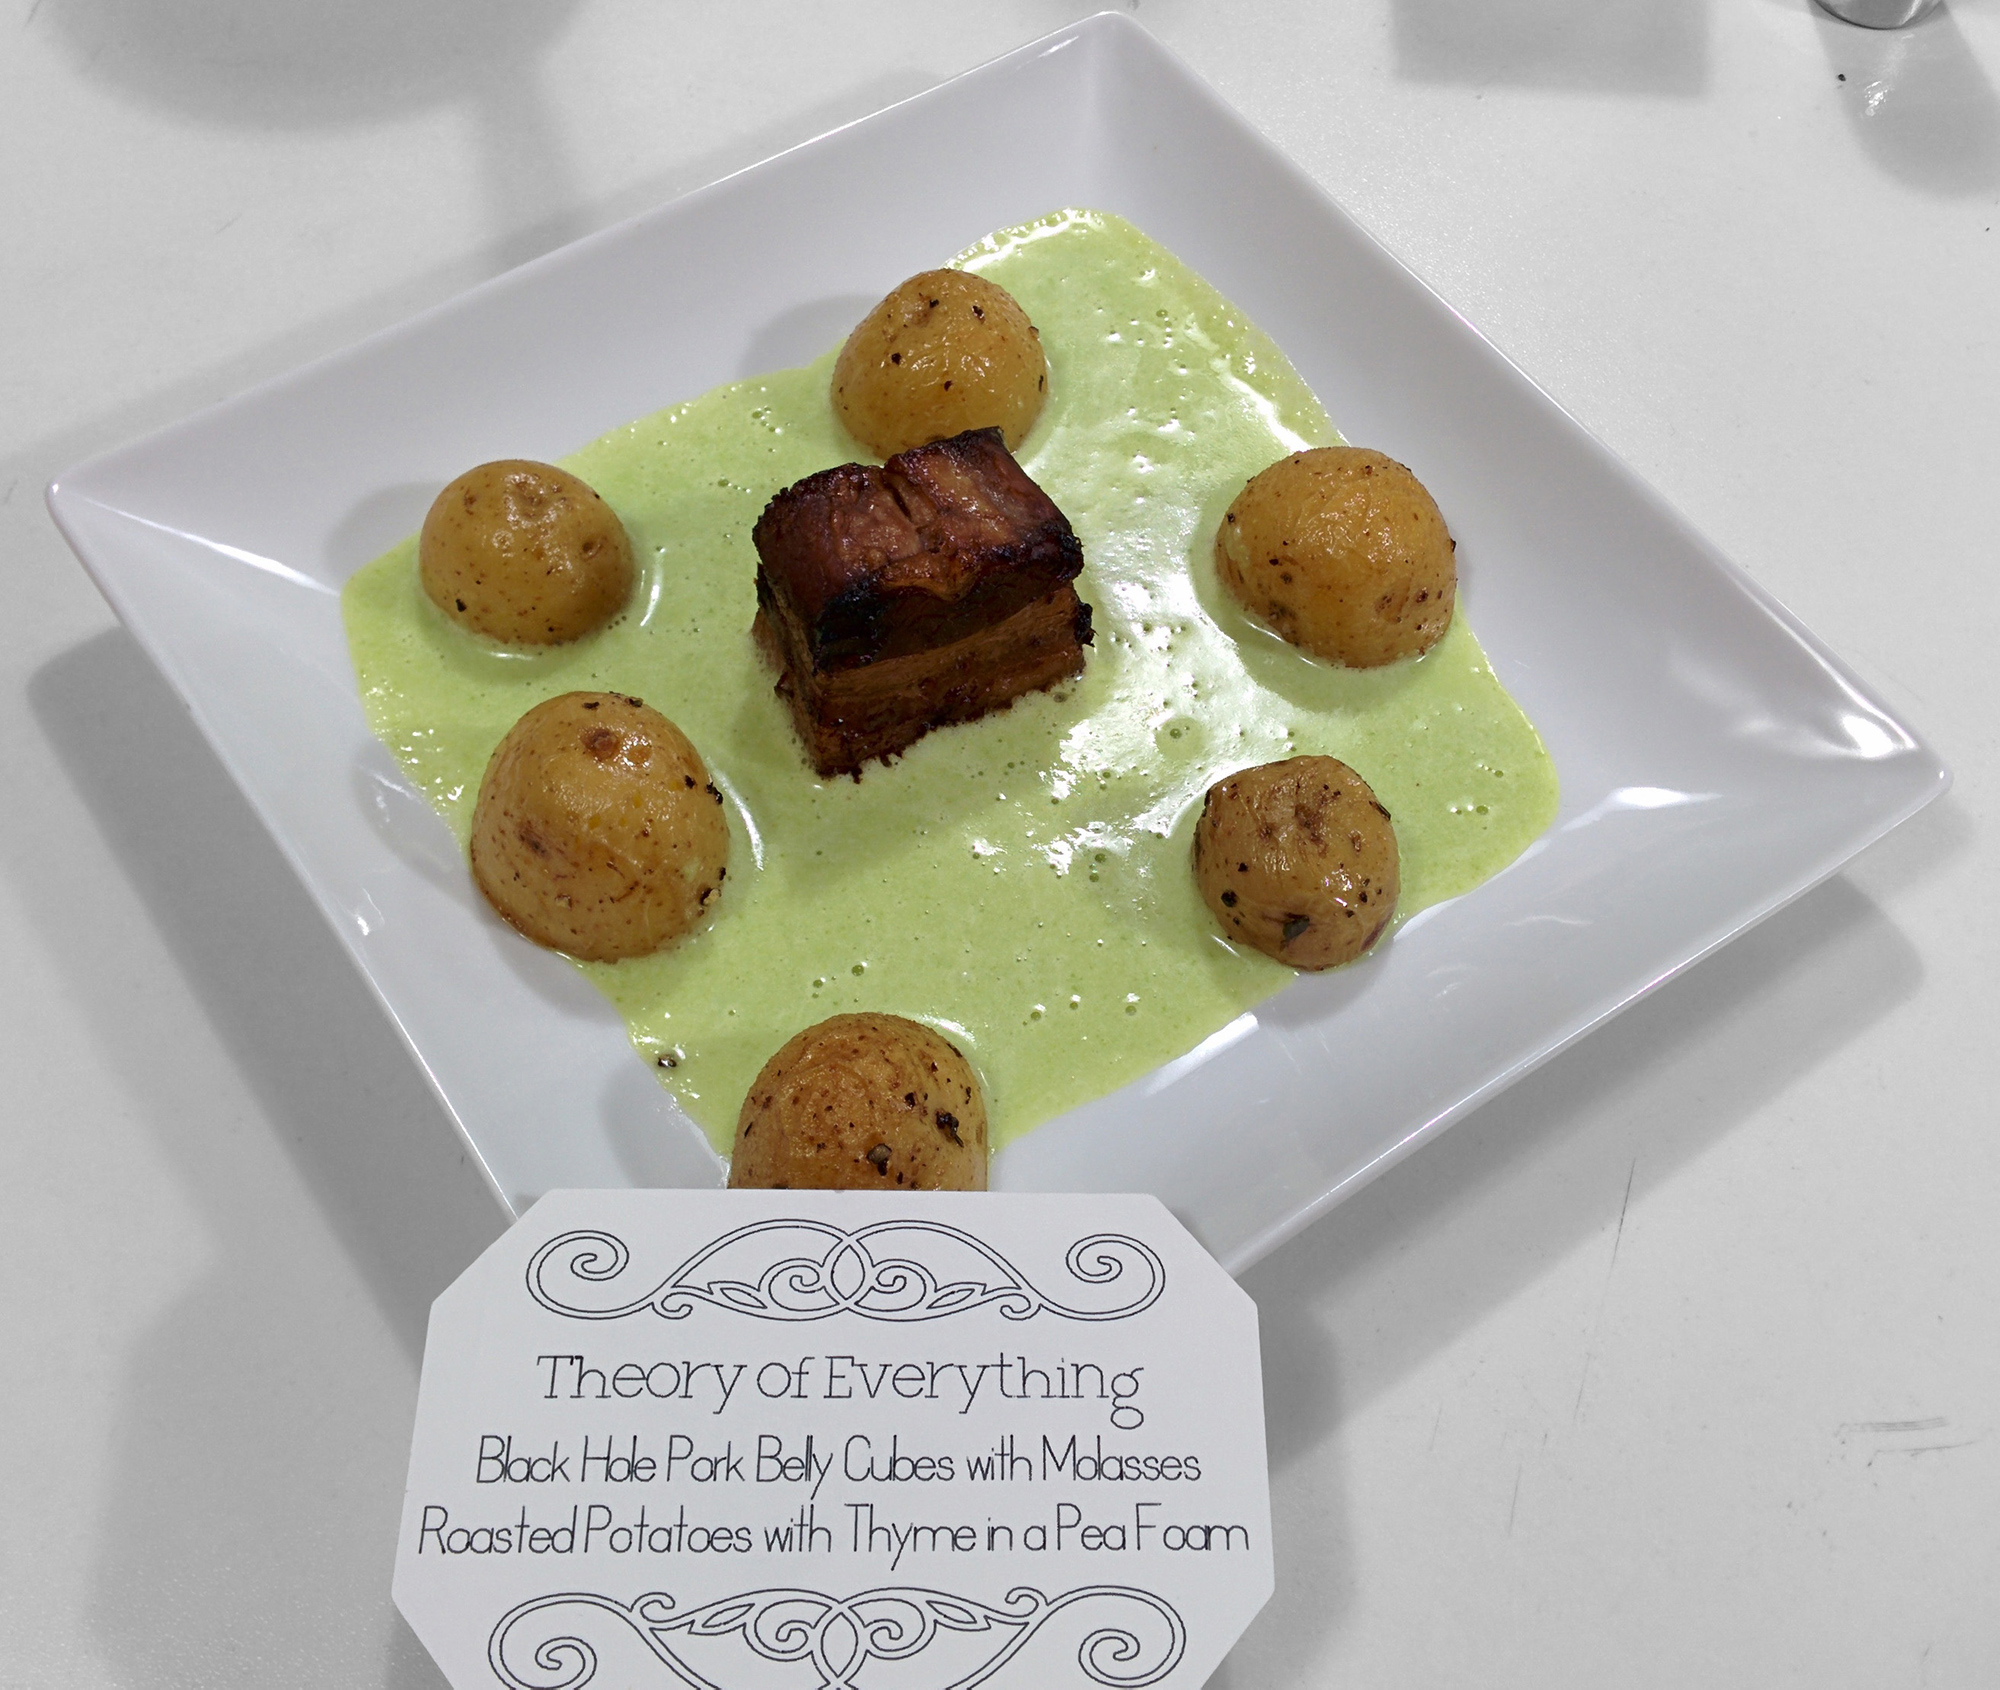 The Theory of Everything: Black hole pork belly cubes with molasses, roasted potatoes with thyme in pea foam